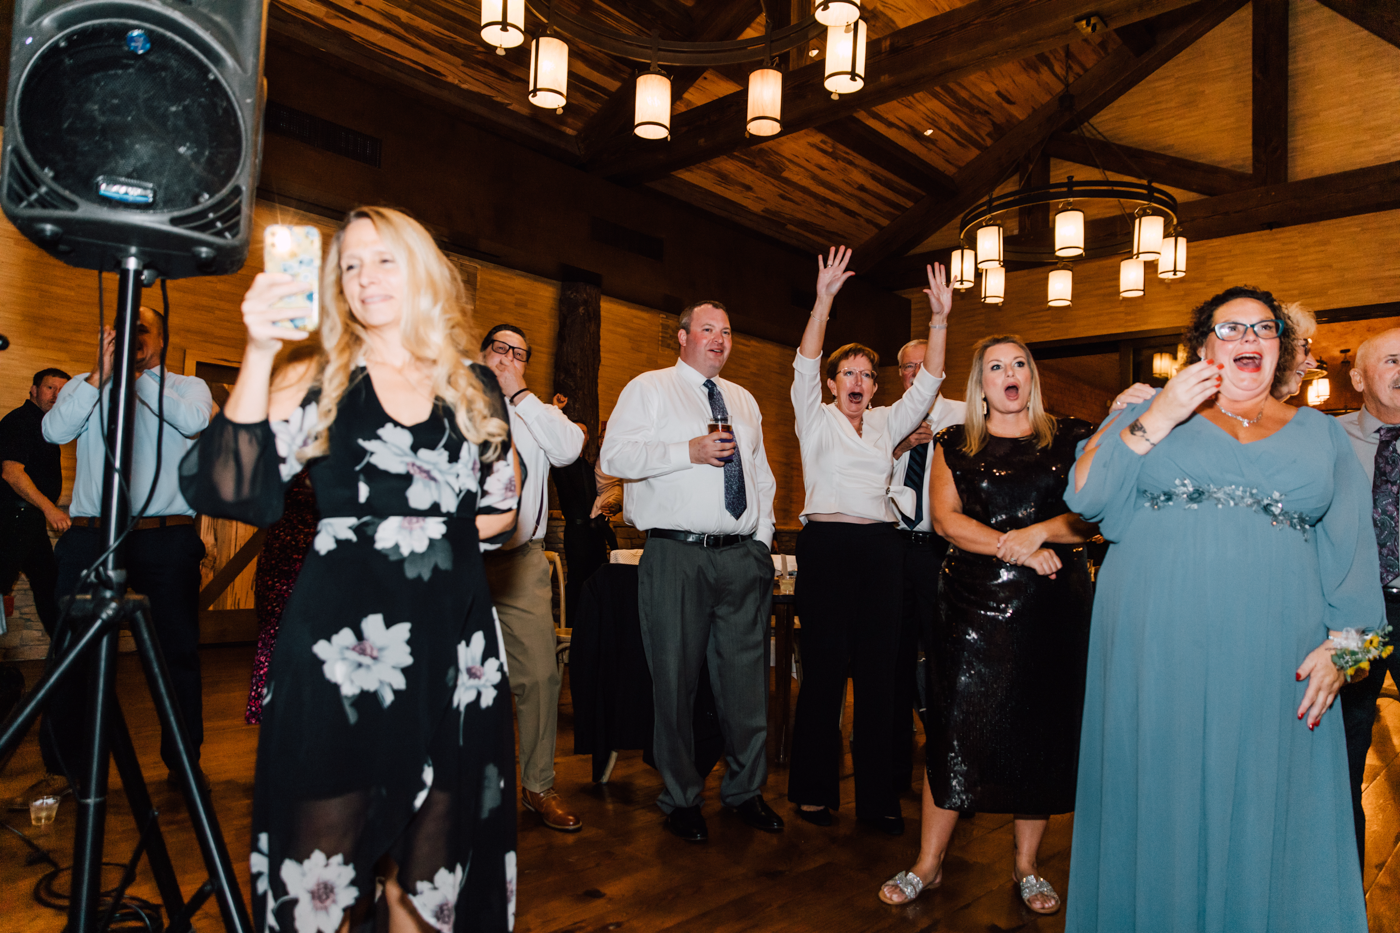  Wedding guests cheer during wedding pregnancy announcement at the reception 